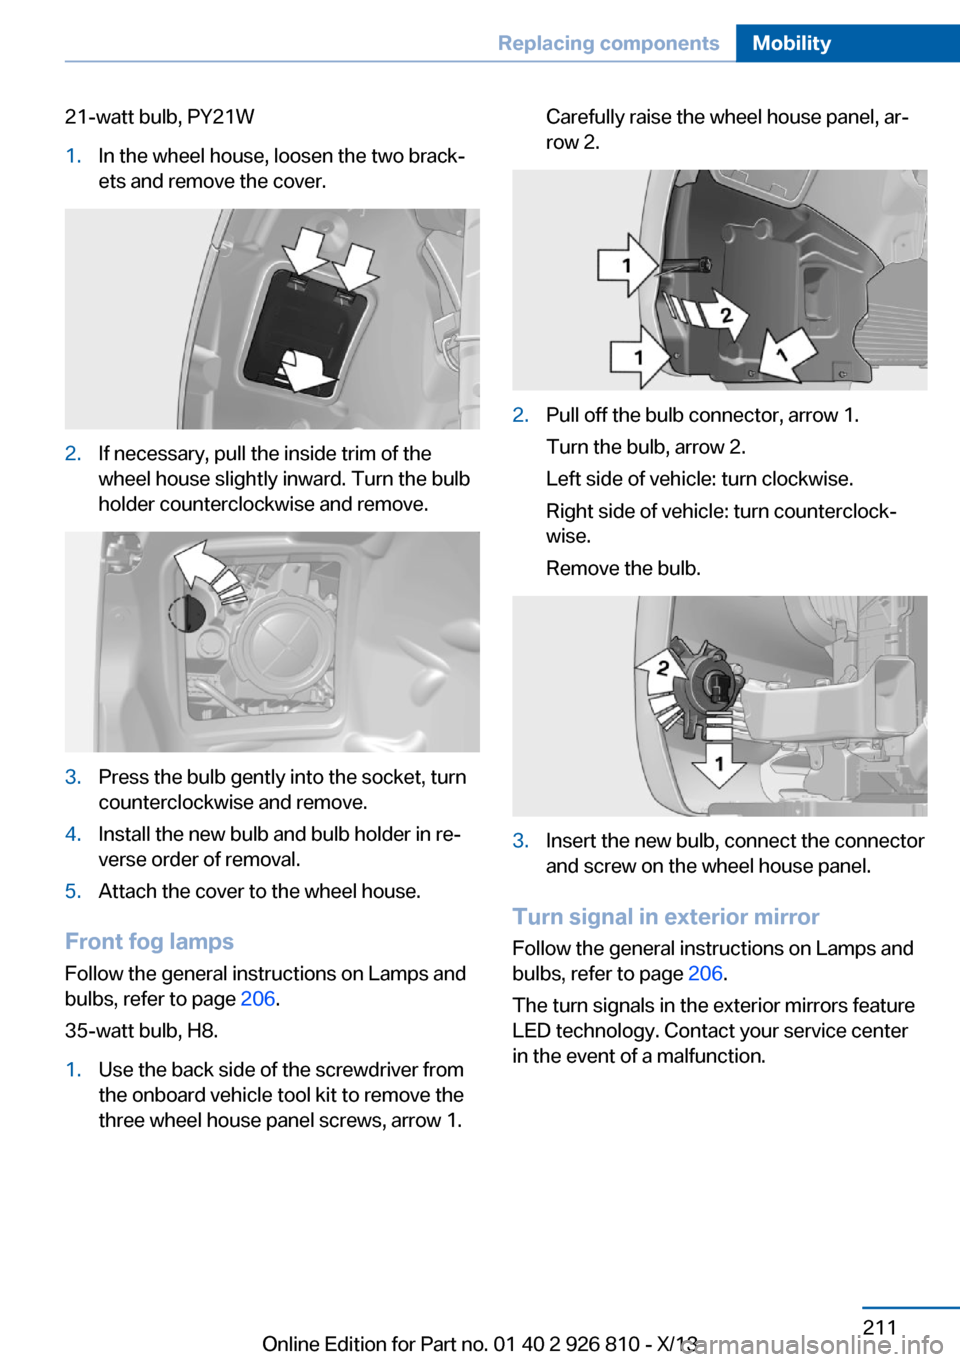 BMW 3 SERIES SEDAN 2013 F30 Service Manual 21-watt bulb, PY21W1.In the wheel house, loosen the two brack‐
ets and remove the cover.2.If necessary, pull the inside trim of the
wheel house slightly inward. Turn the bulb
holder counterclockwise